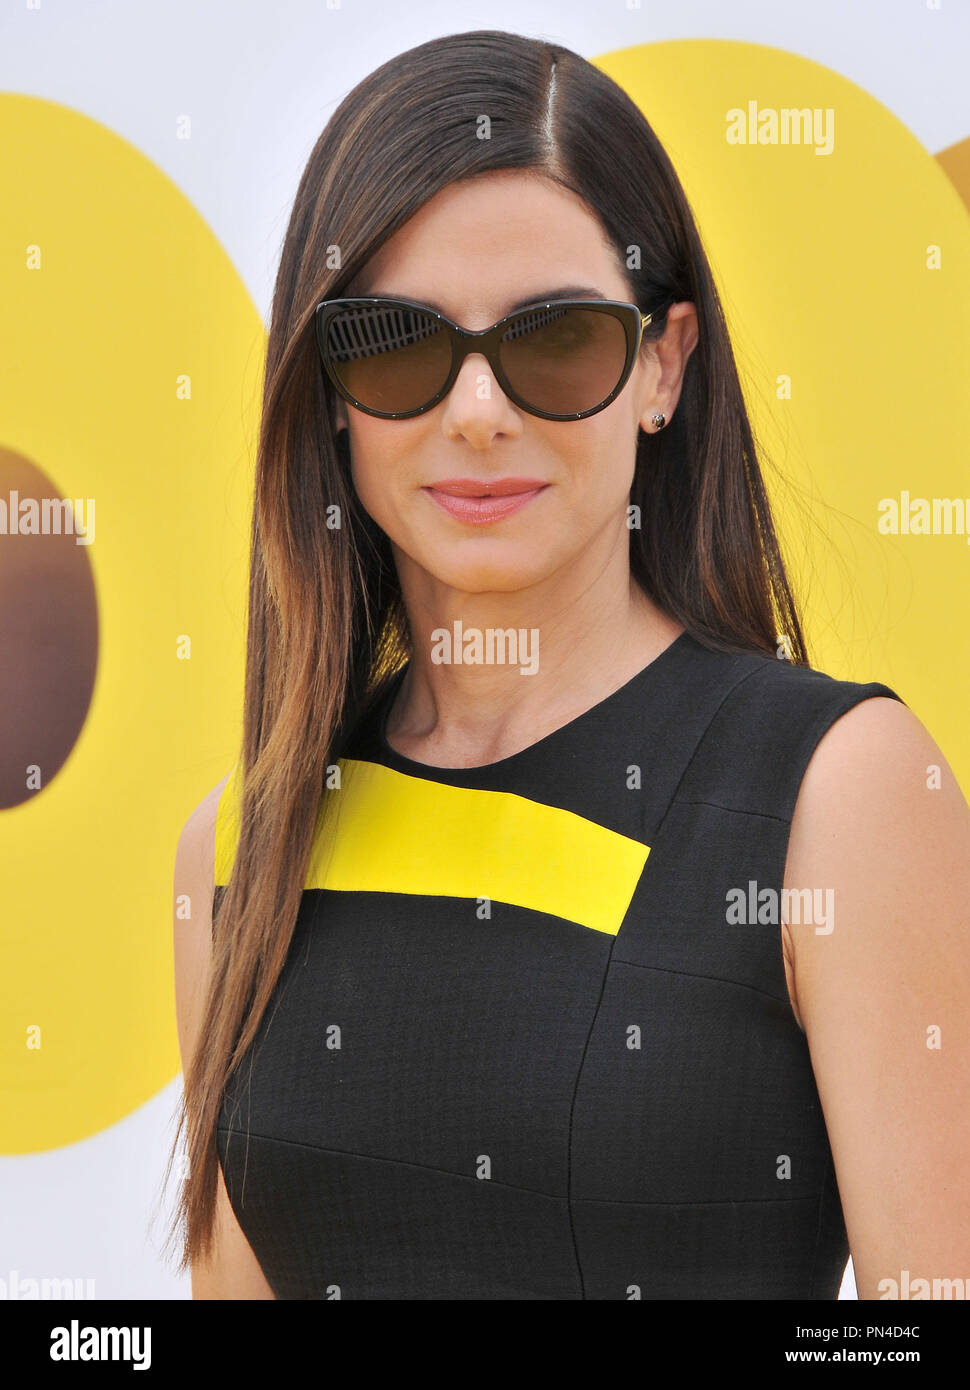 Sandra Bullock at the 'Minions' Los Angeles Premiere held at the Shrine Auditorium in Los Angeles, CA on Saturday, June 27, 2015. Photo by  PRPP PRPP/PictureLux  File Reference # 32651 004PRPP01  For Editorial Use Only -  All Rights Reserved Stock Photo